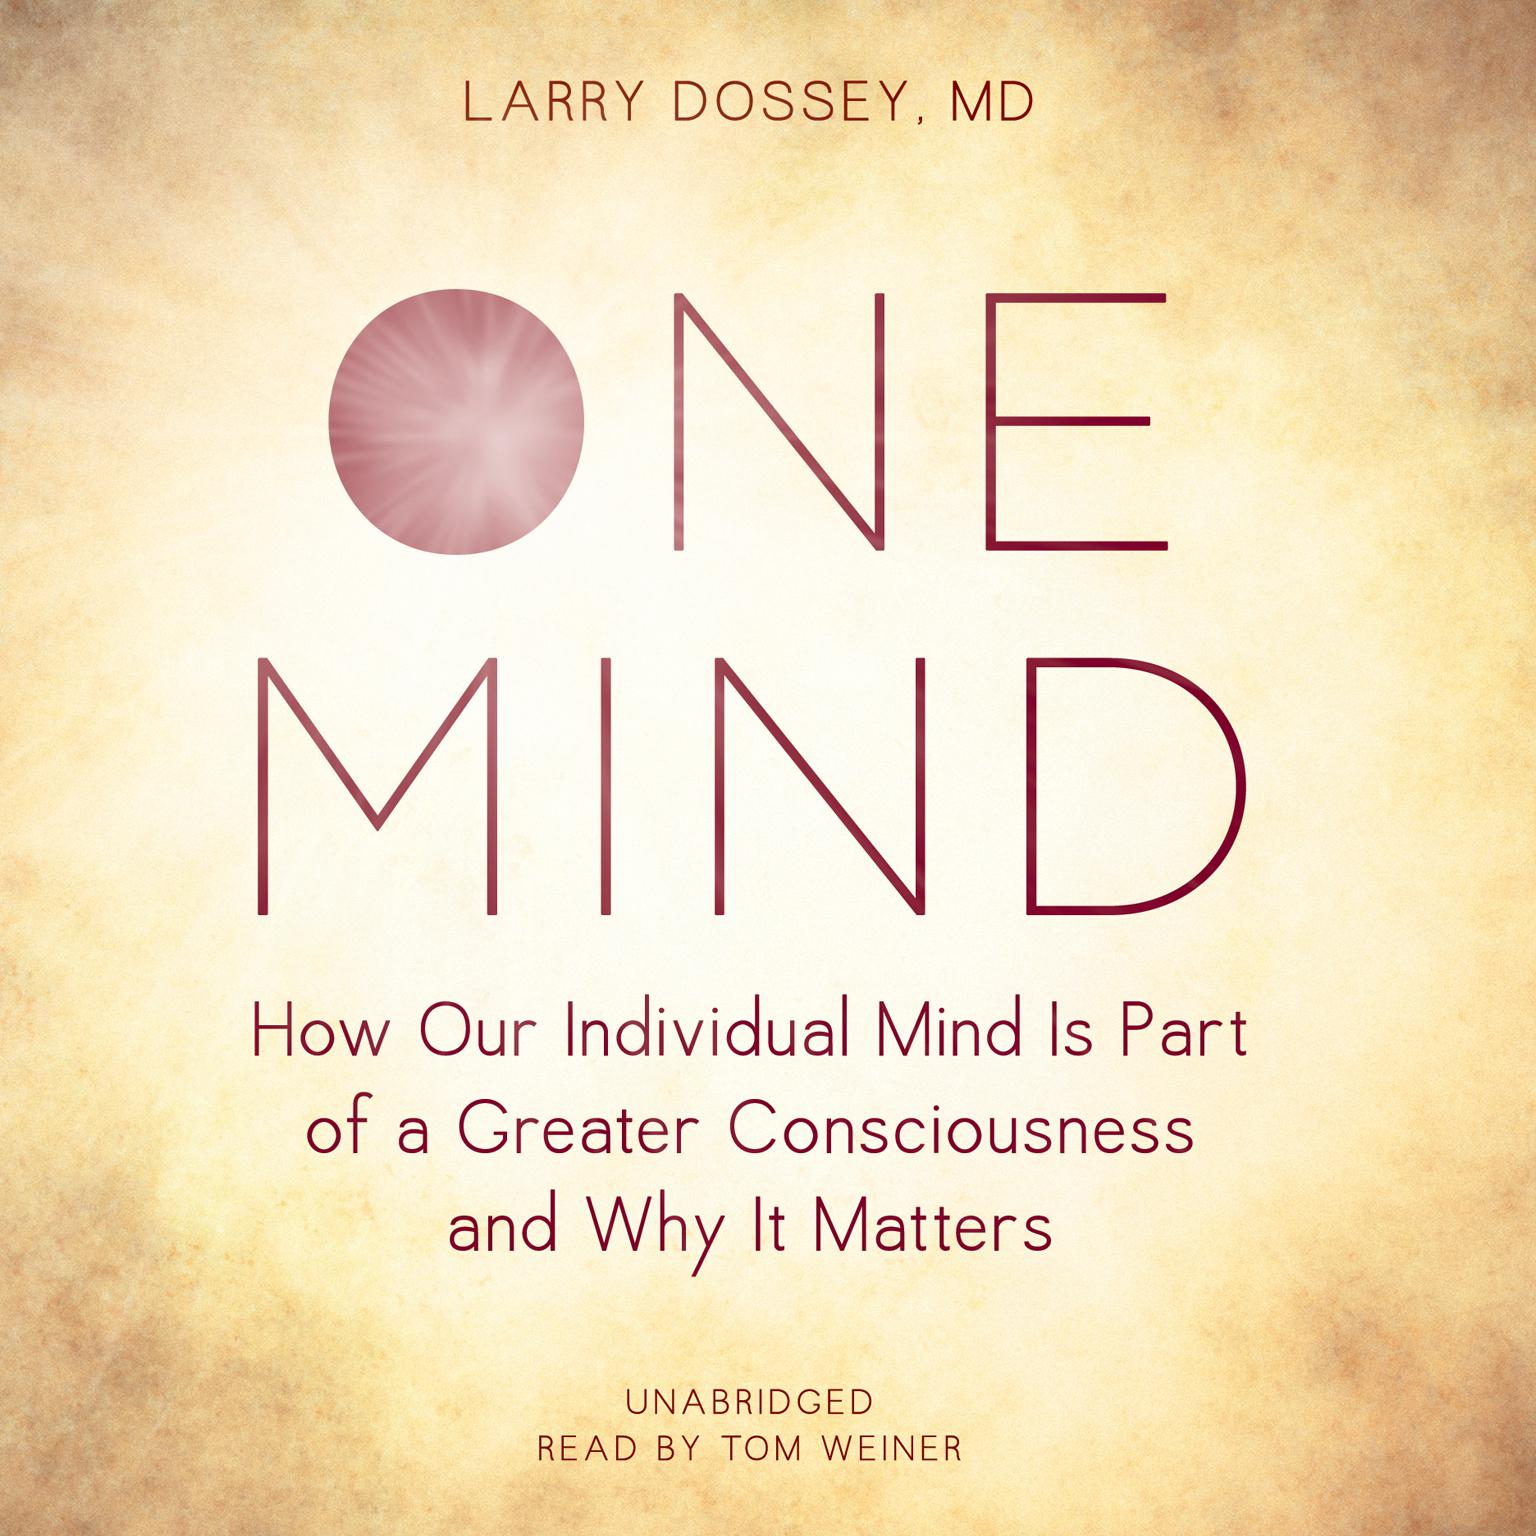 One Mind: How Our Individual Mind Is Part of a Greater Consciousness and Why It Matters Audiobook, by Larry Dossey